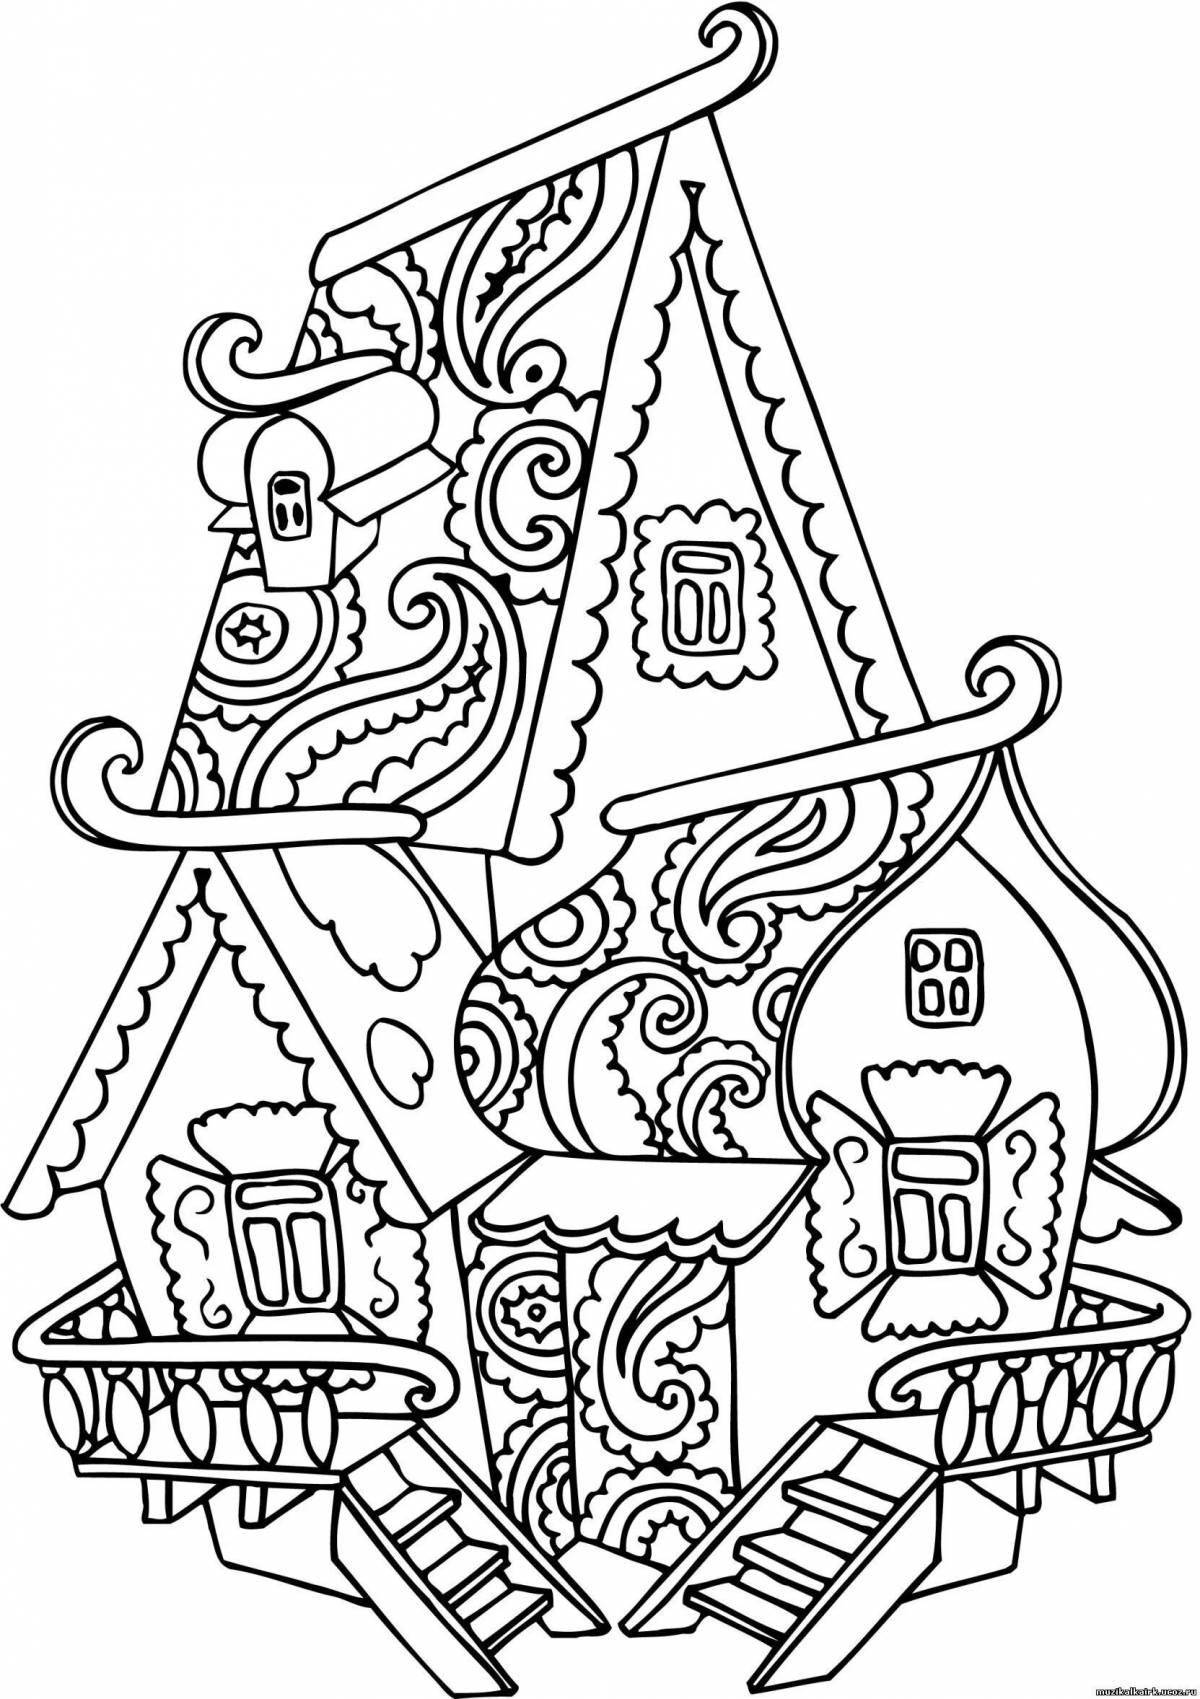 Coloring page luxury russian tower